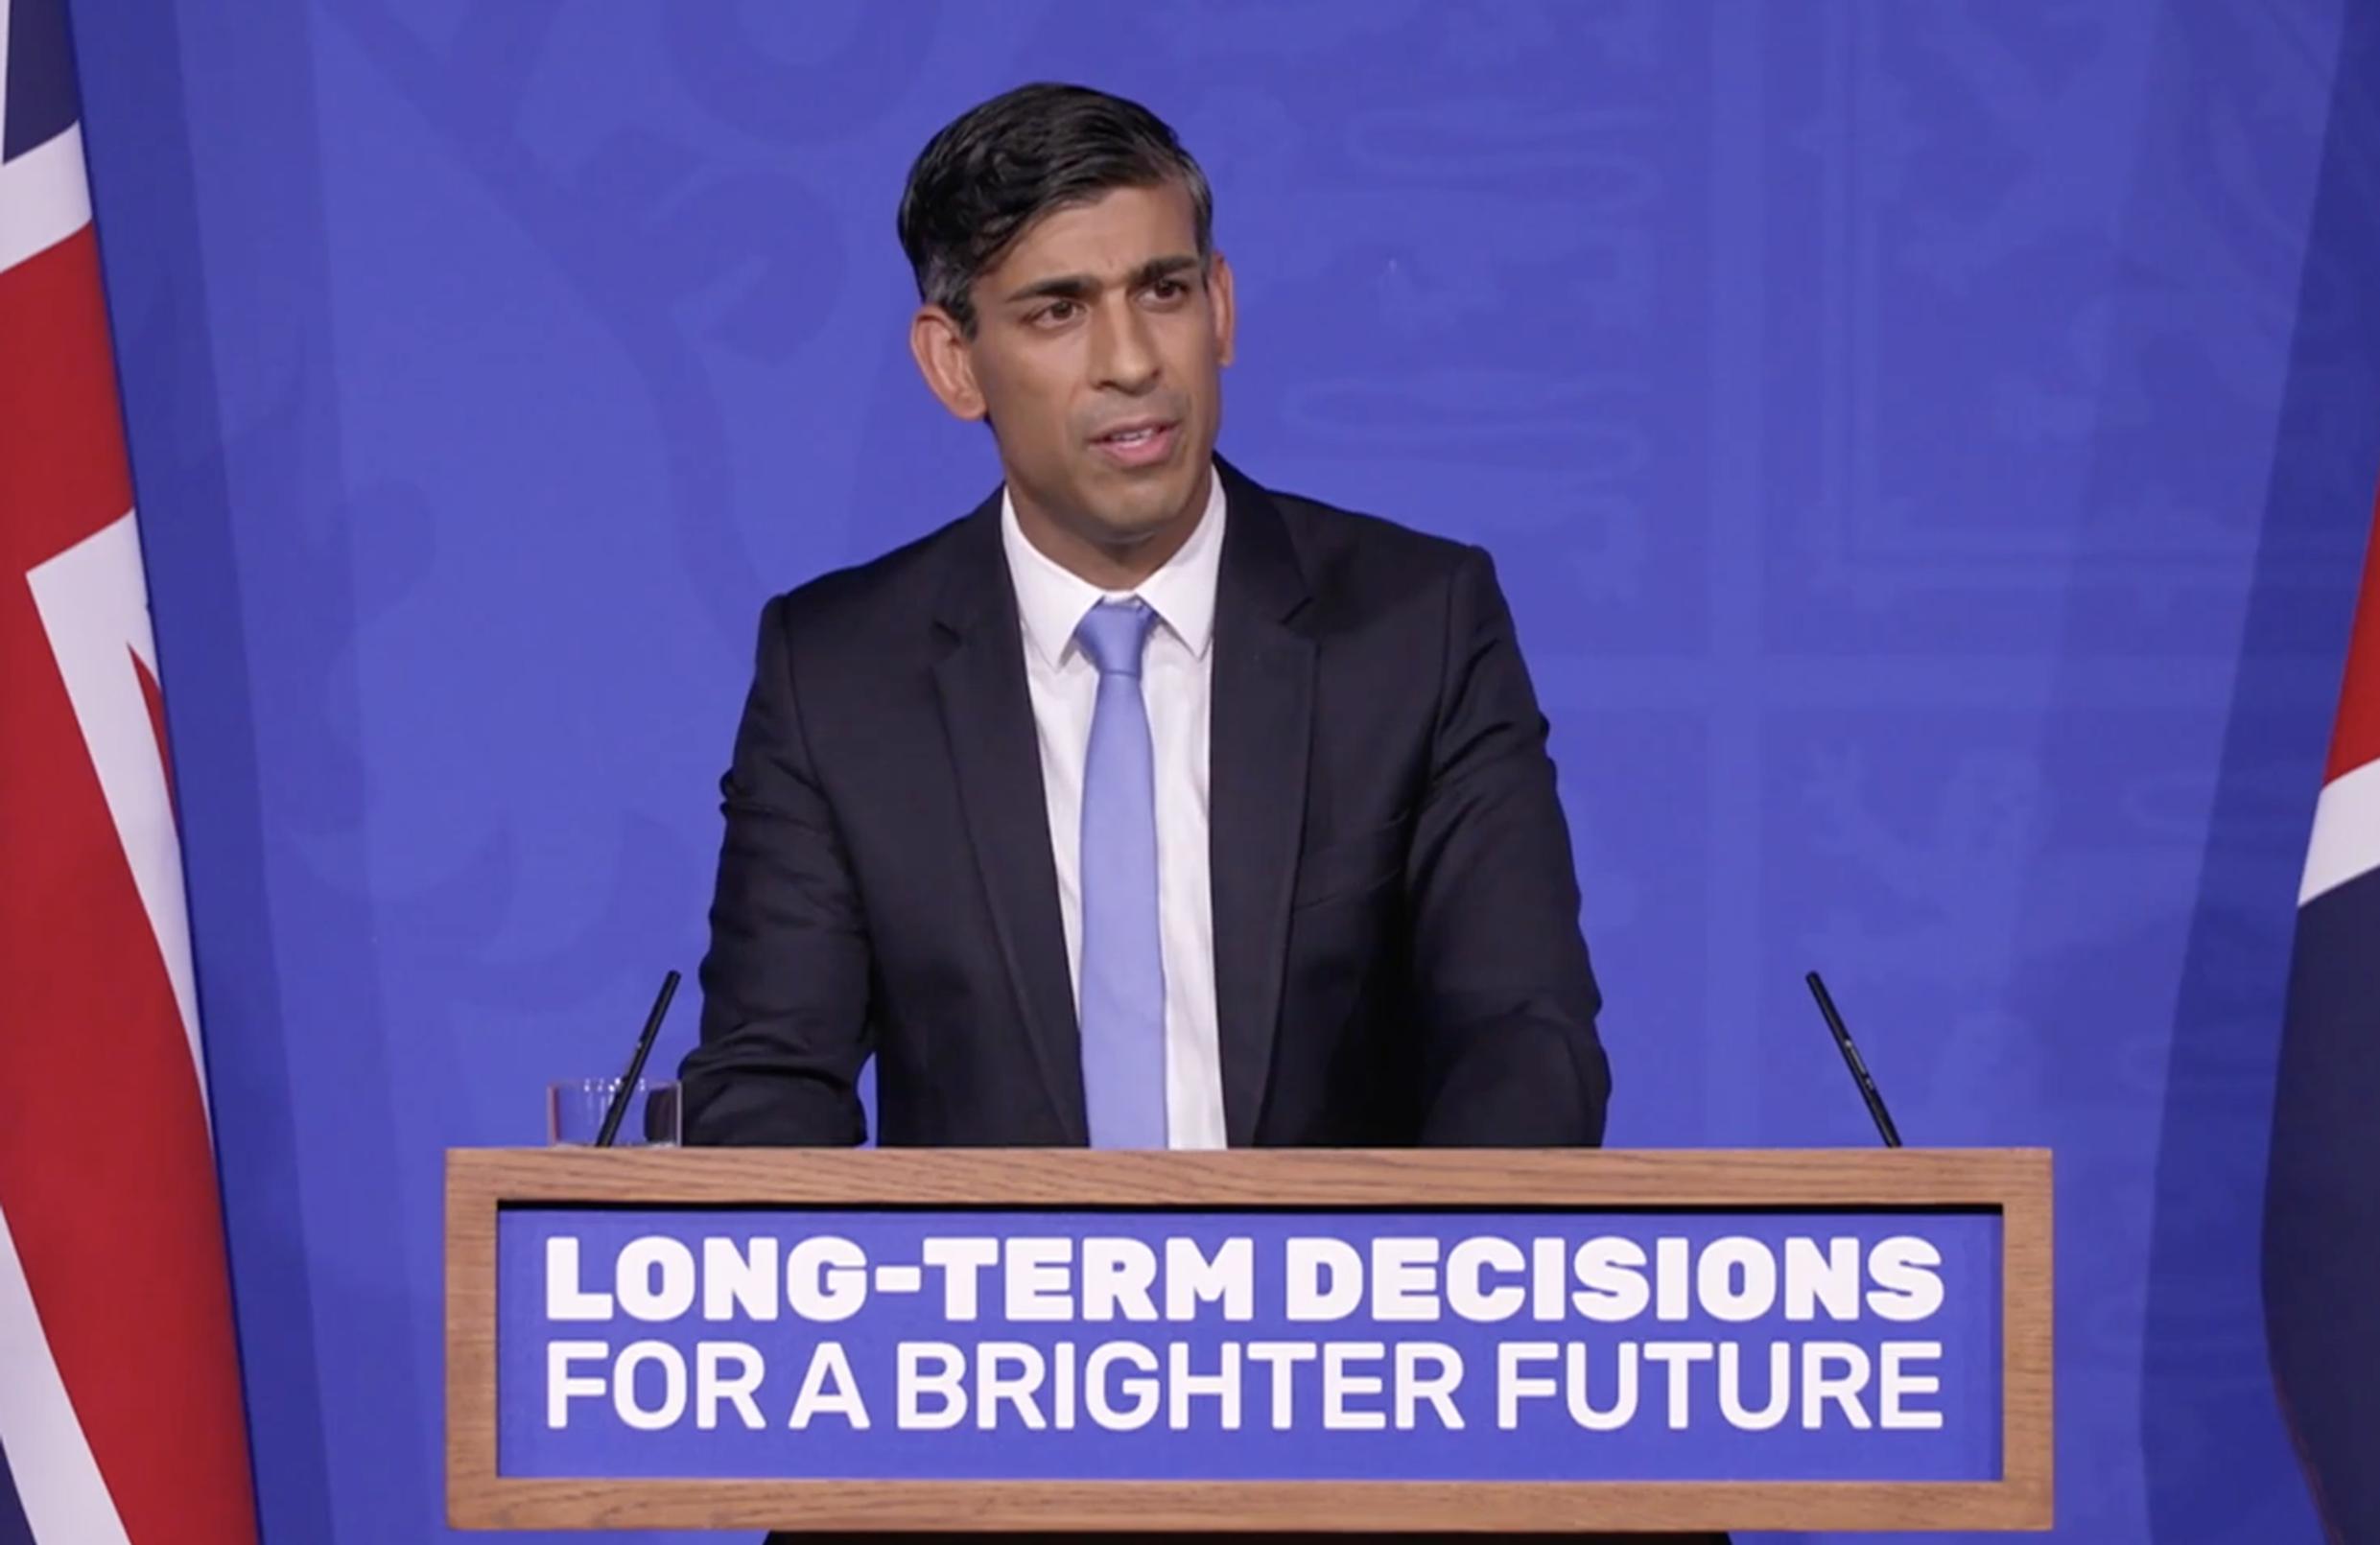 PM Rishi Sunak announces his new thinking on meeting climate change targets